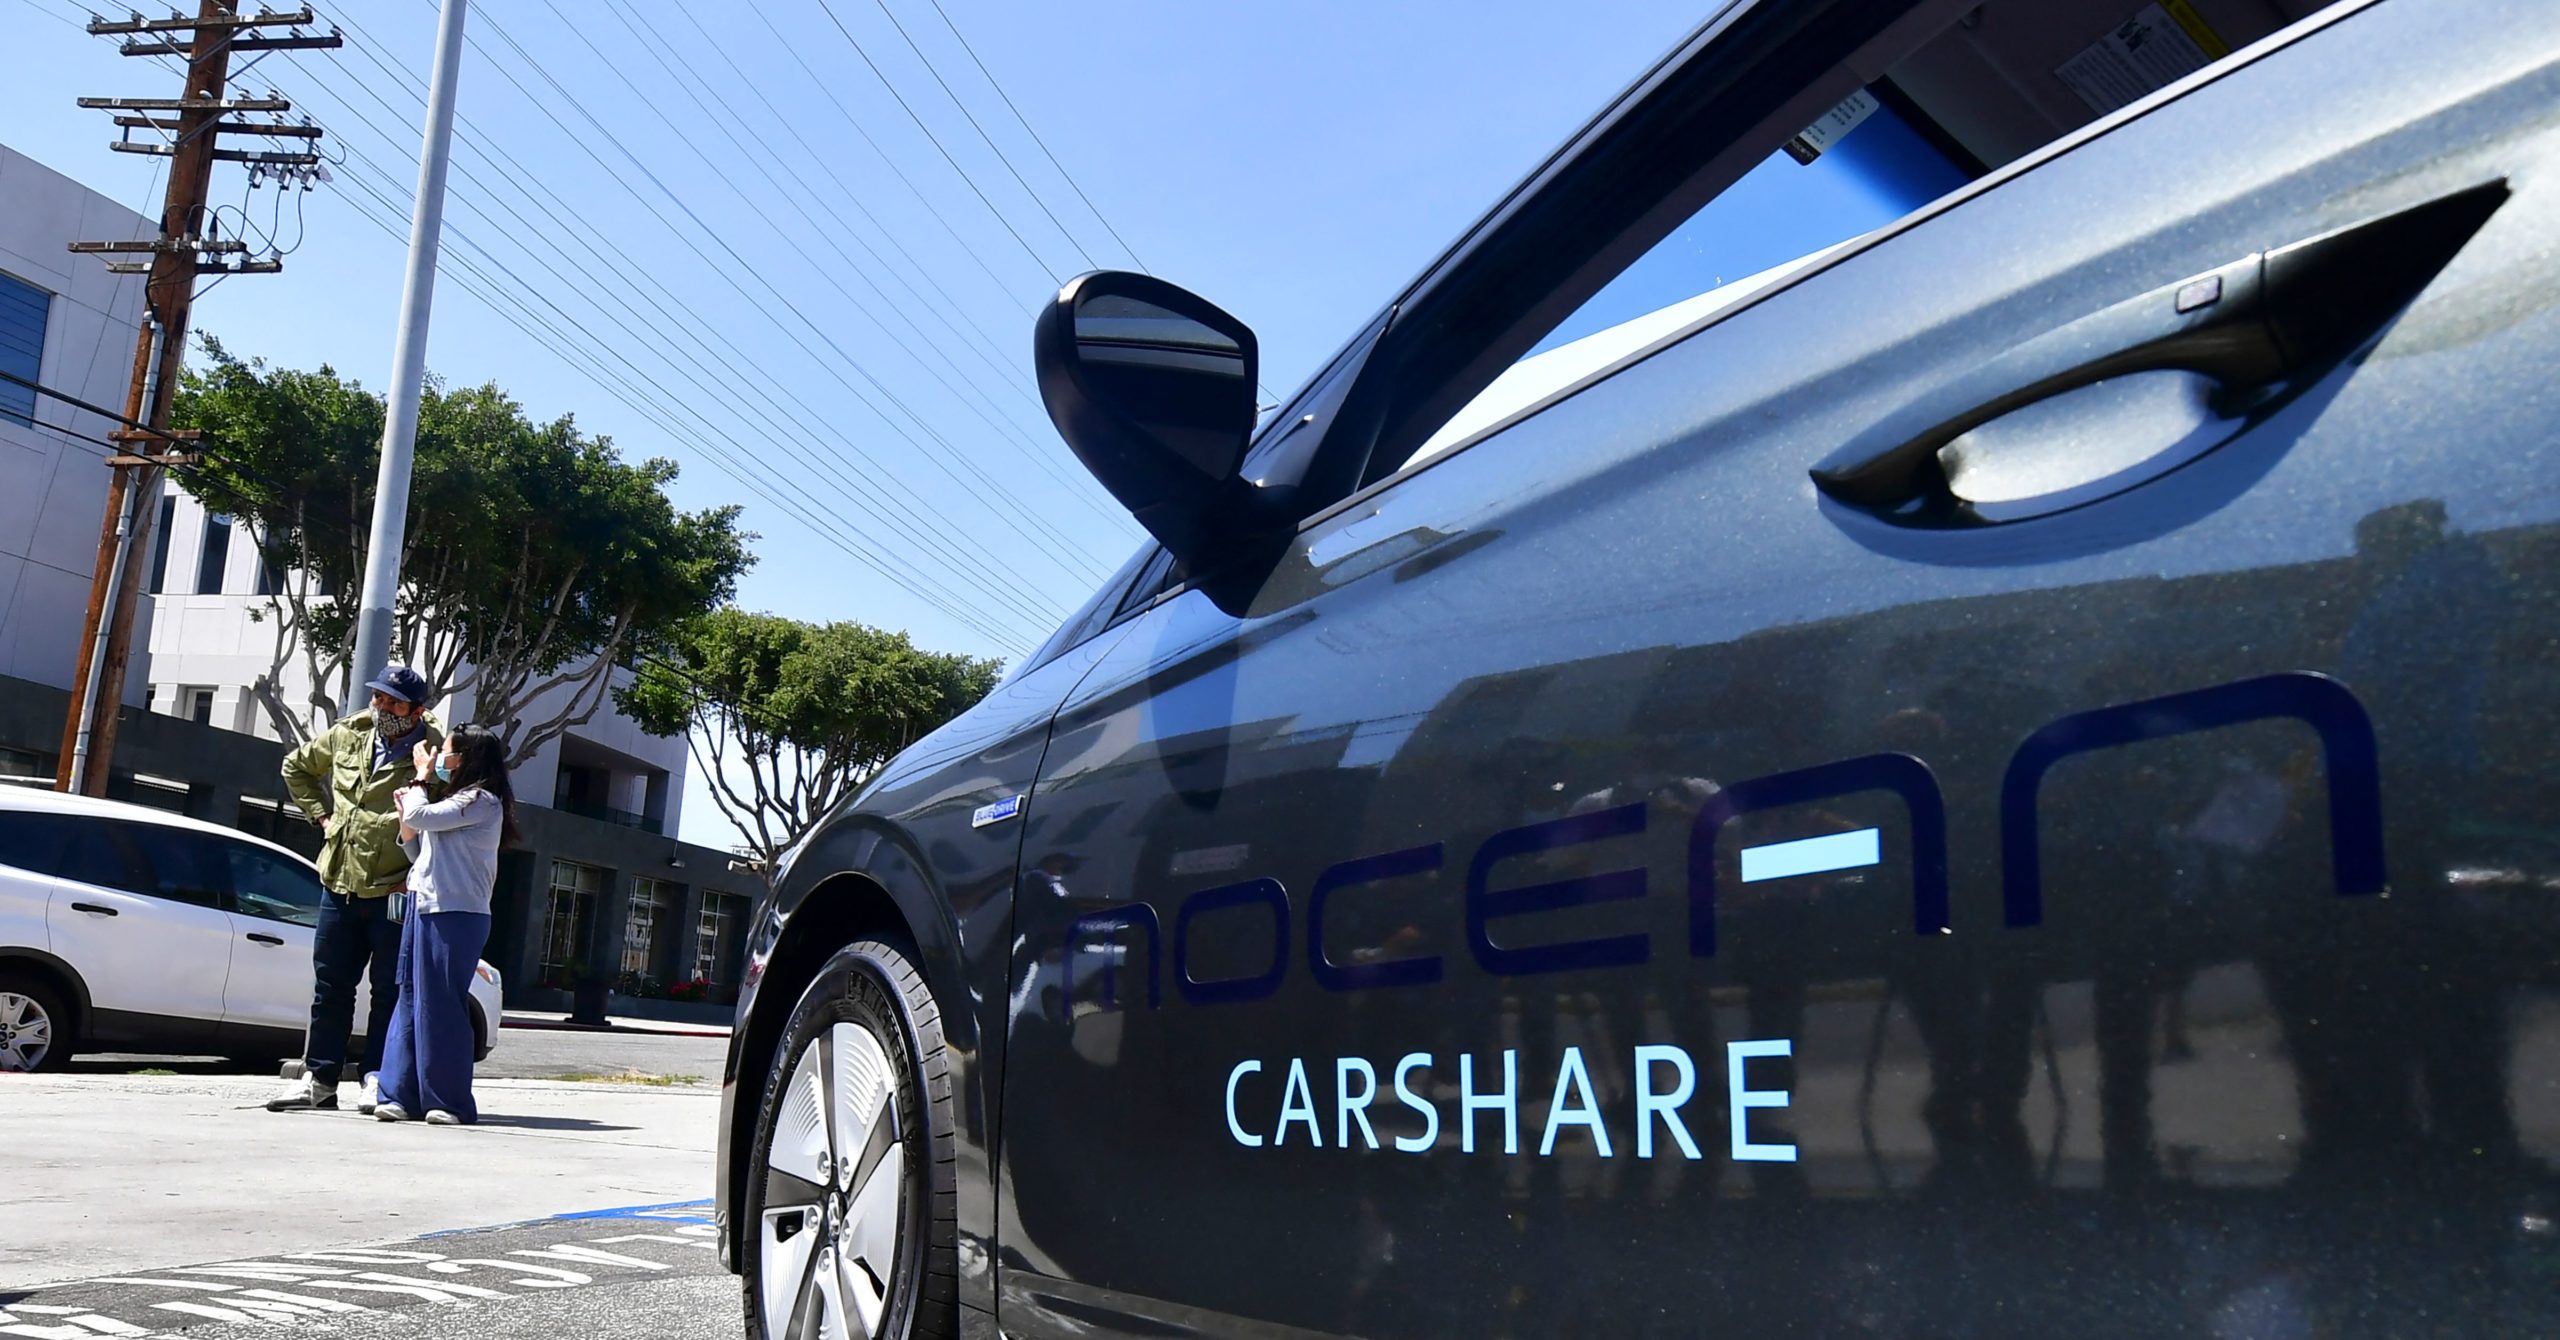 A vehicle from the Mocean car-share service is seen in Los Angeles, California, in April of 2021. World Economic Forum leader Klaus Schwab said this week he believes individual car ownership is wasteful and should be abolished in favor of car-sharing services.